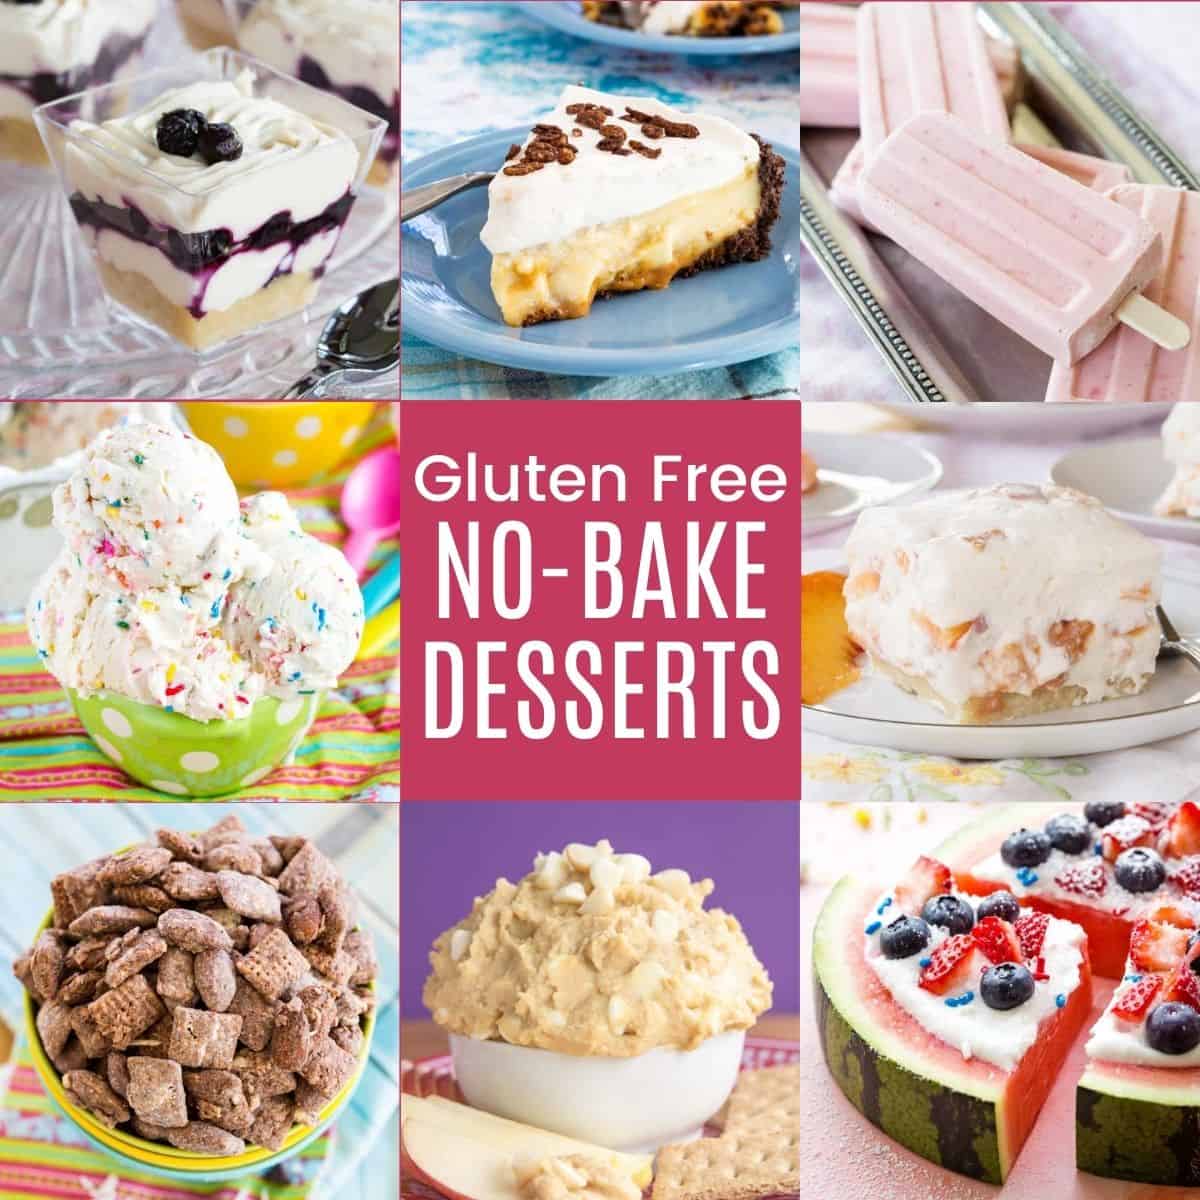 30+ Best Summer Desserts (Baked and No-Baked)